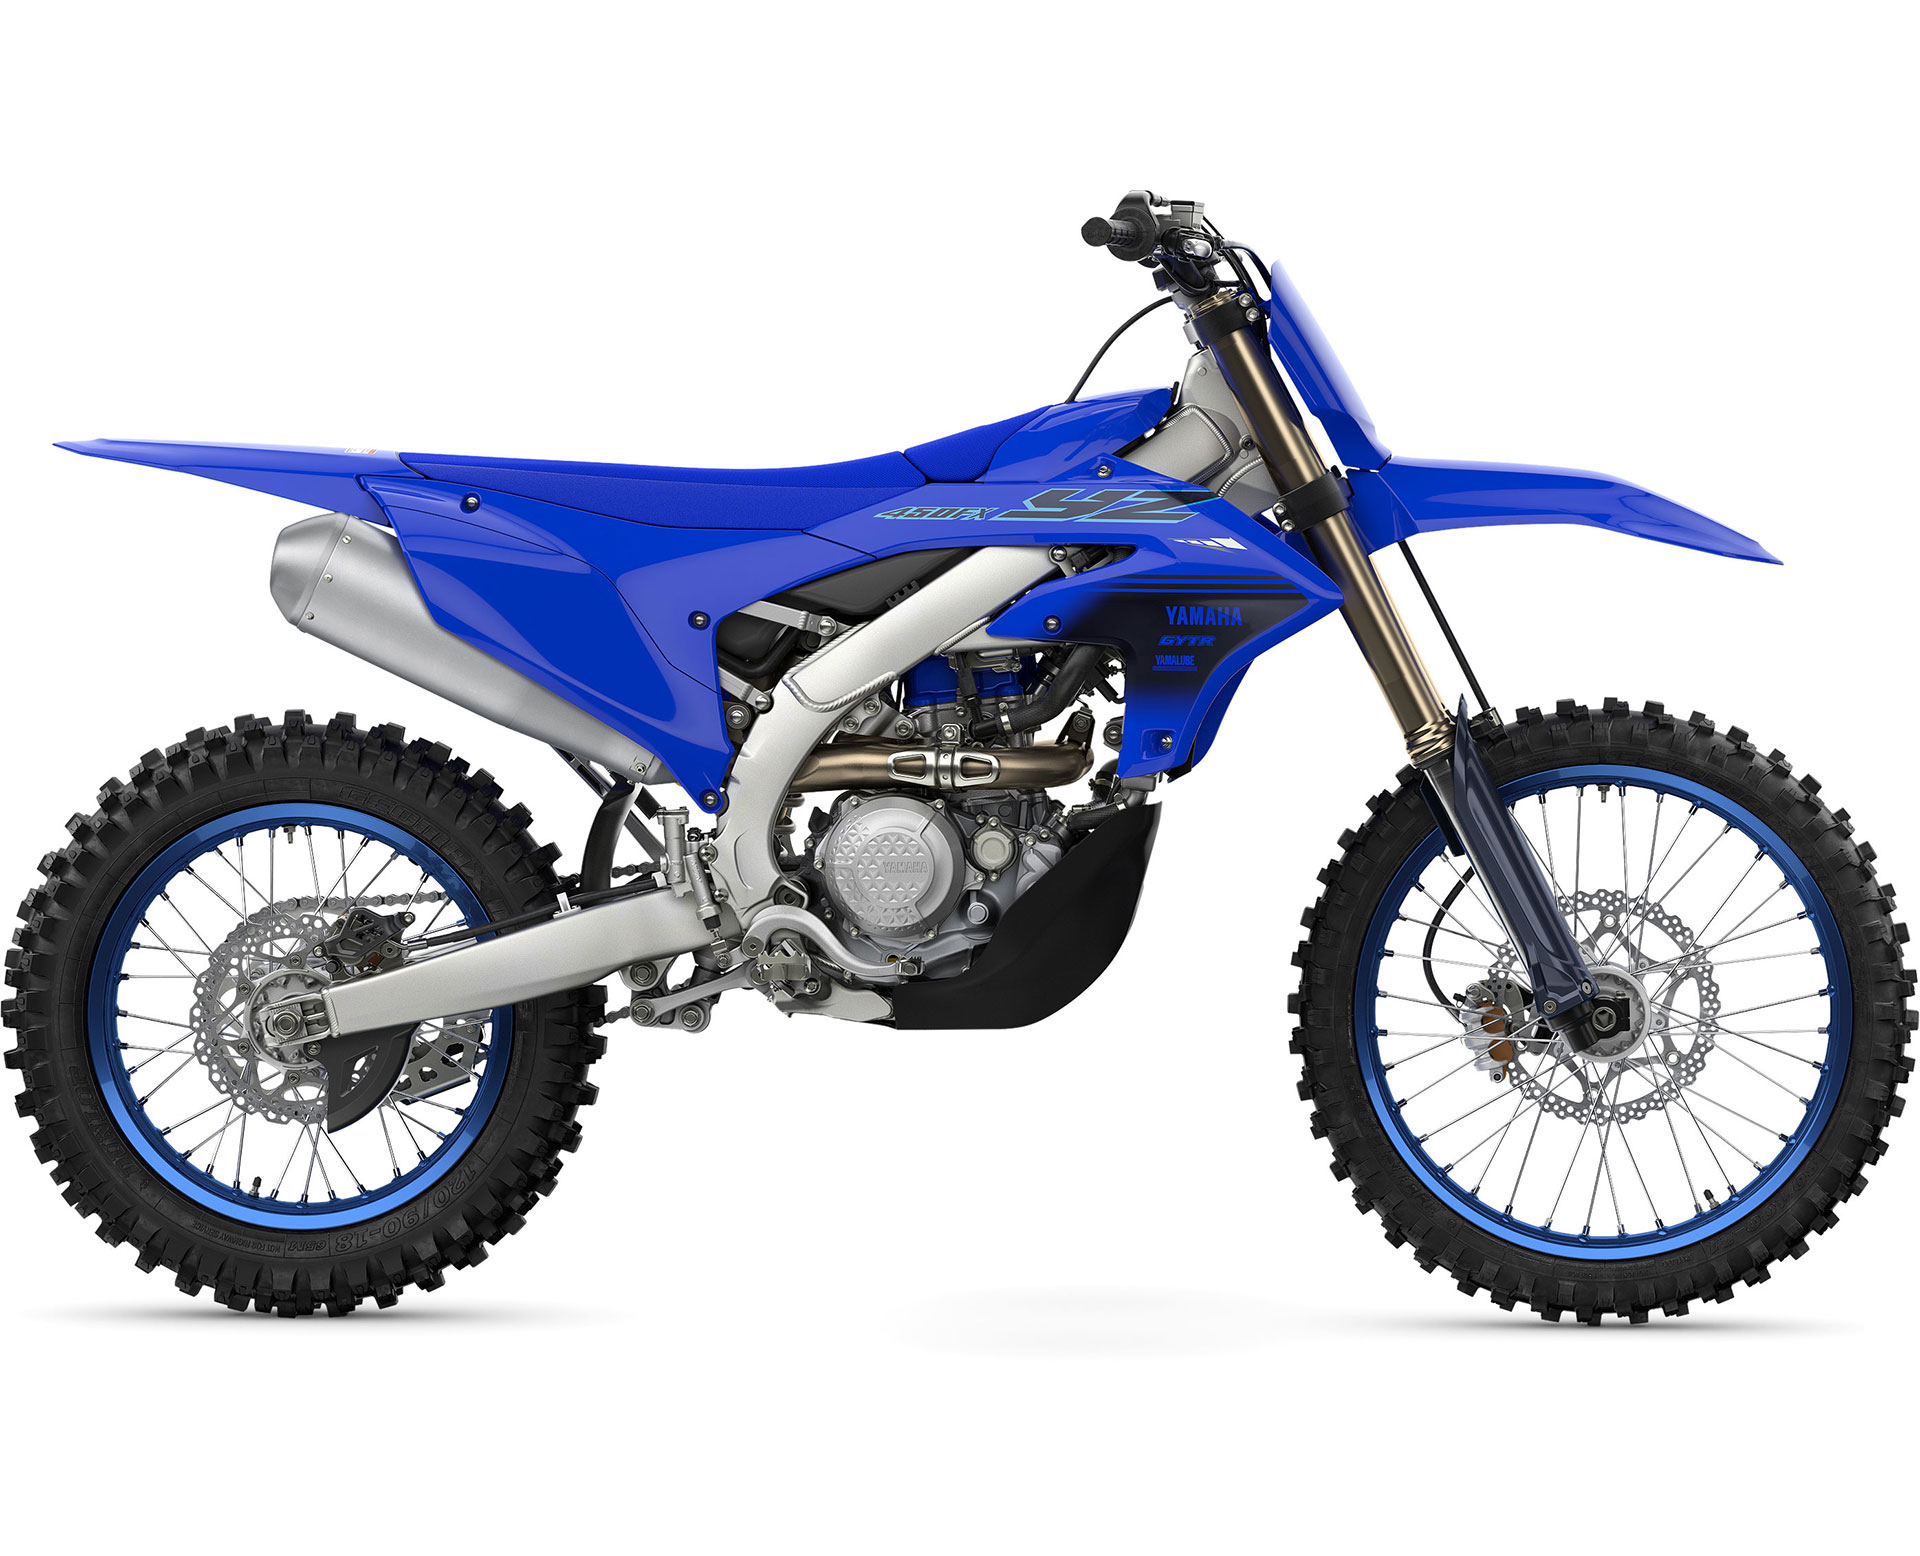 Thumbnail of your customized YZ450FX 2024